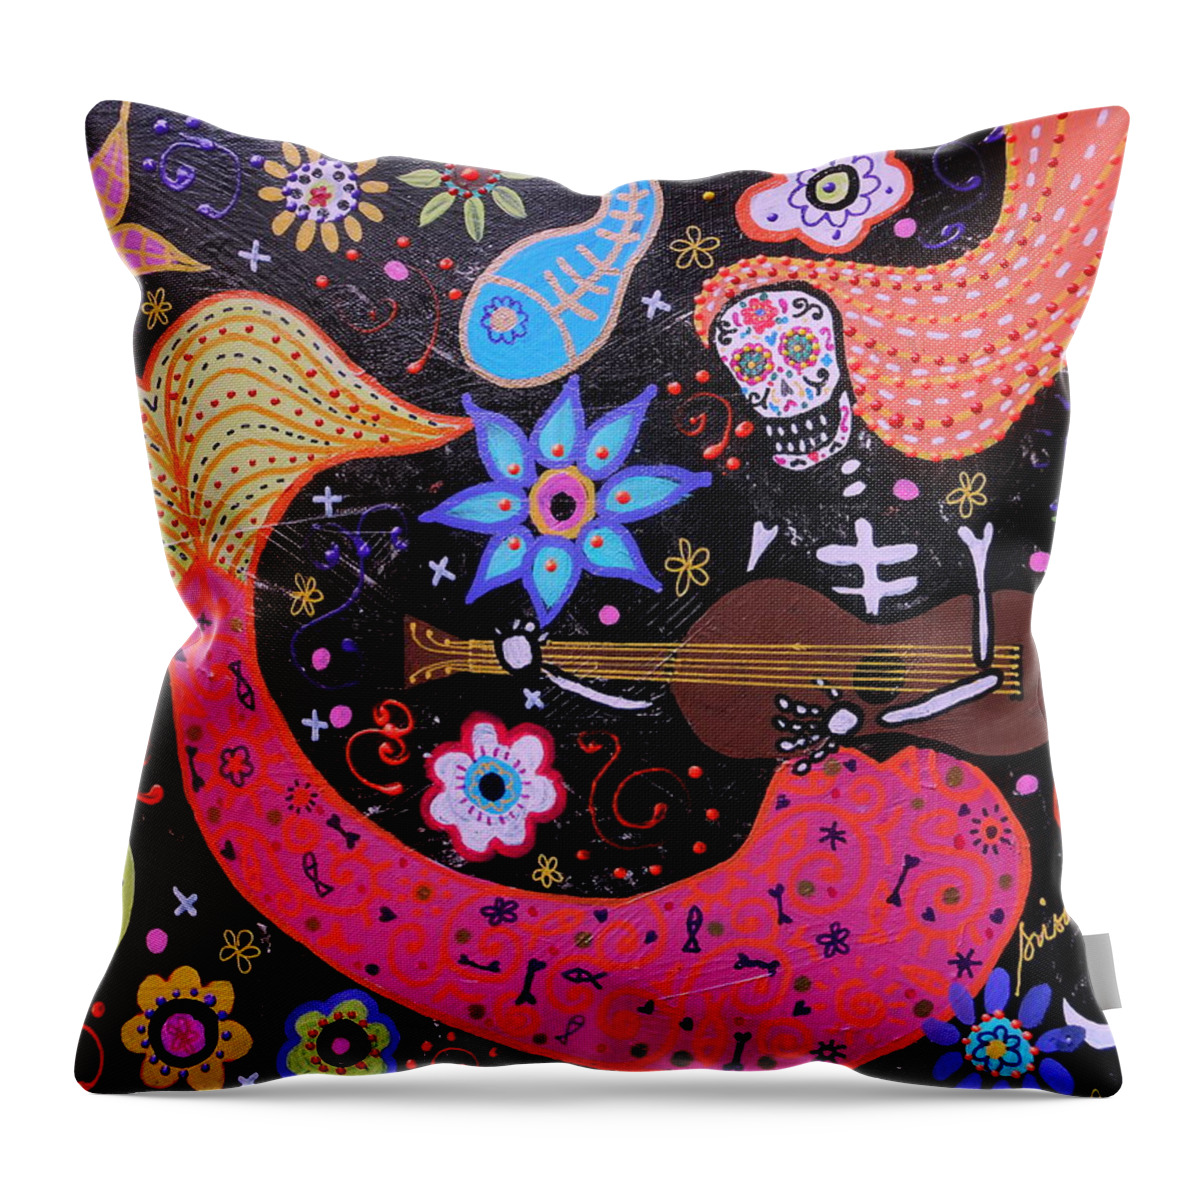 Mermaid Throw Pillow featuring the painting Day Of The Dead Mermaid #1 by Pristine Cartera Turkus